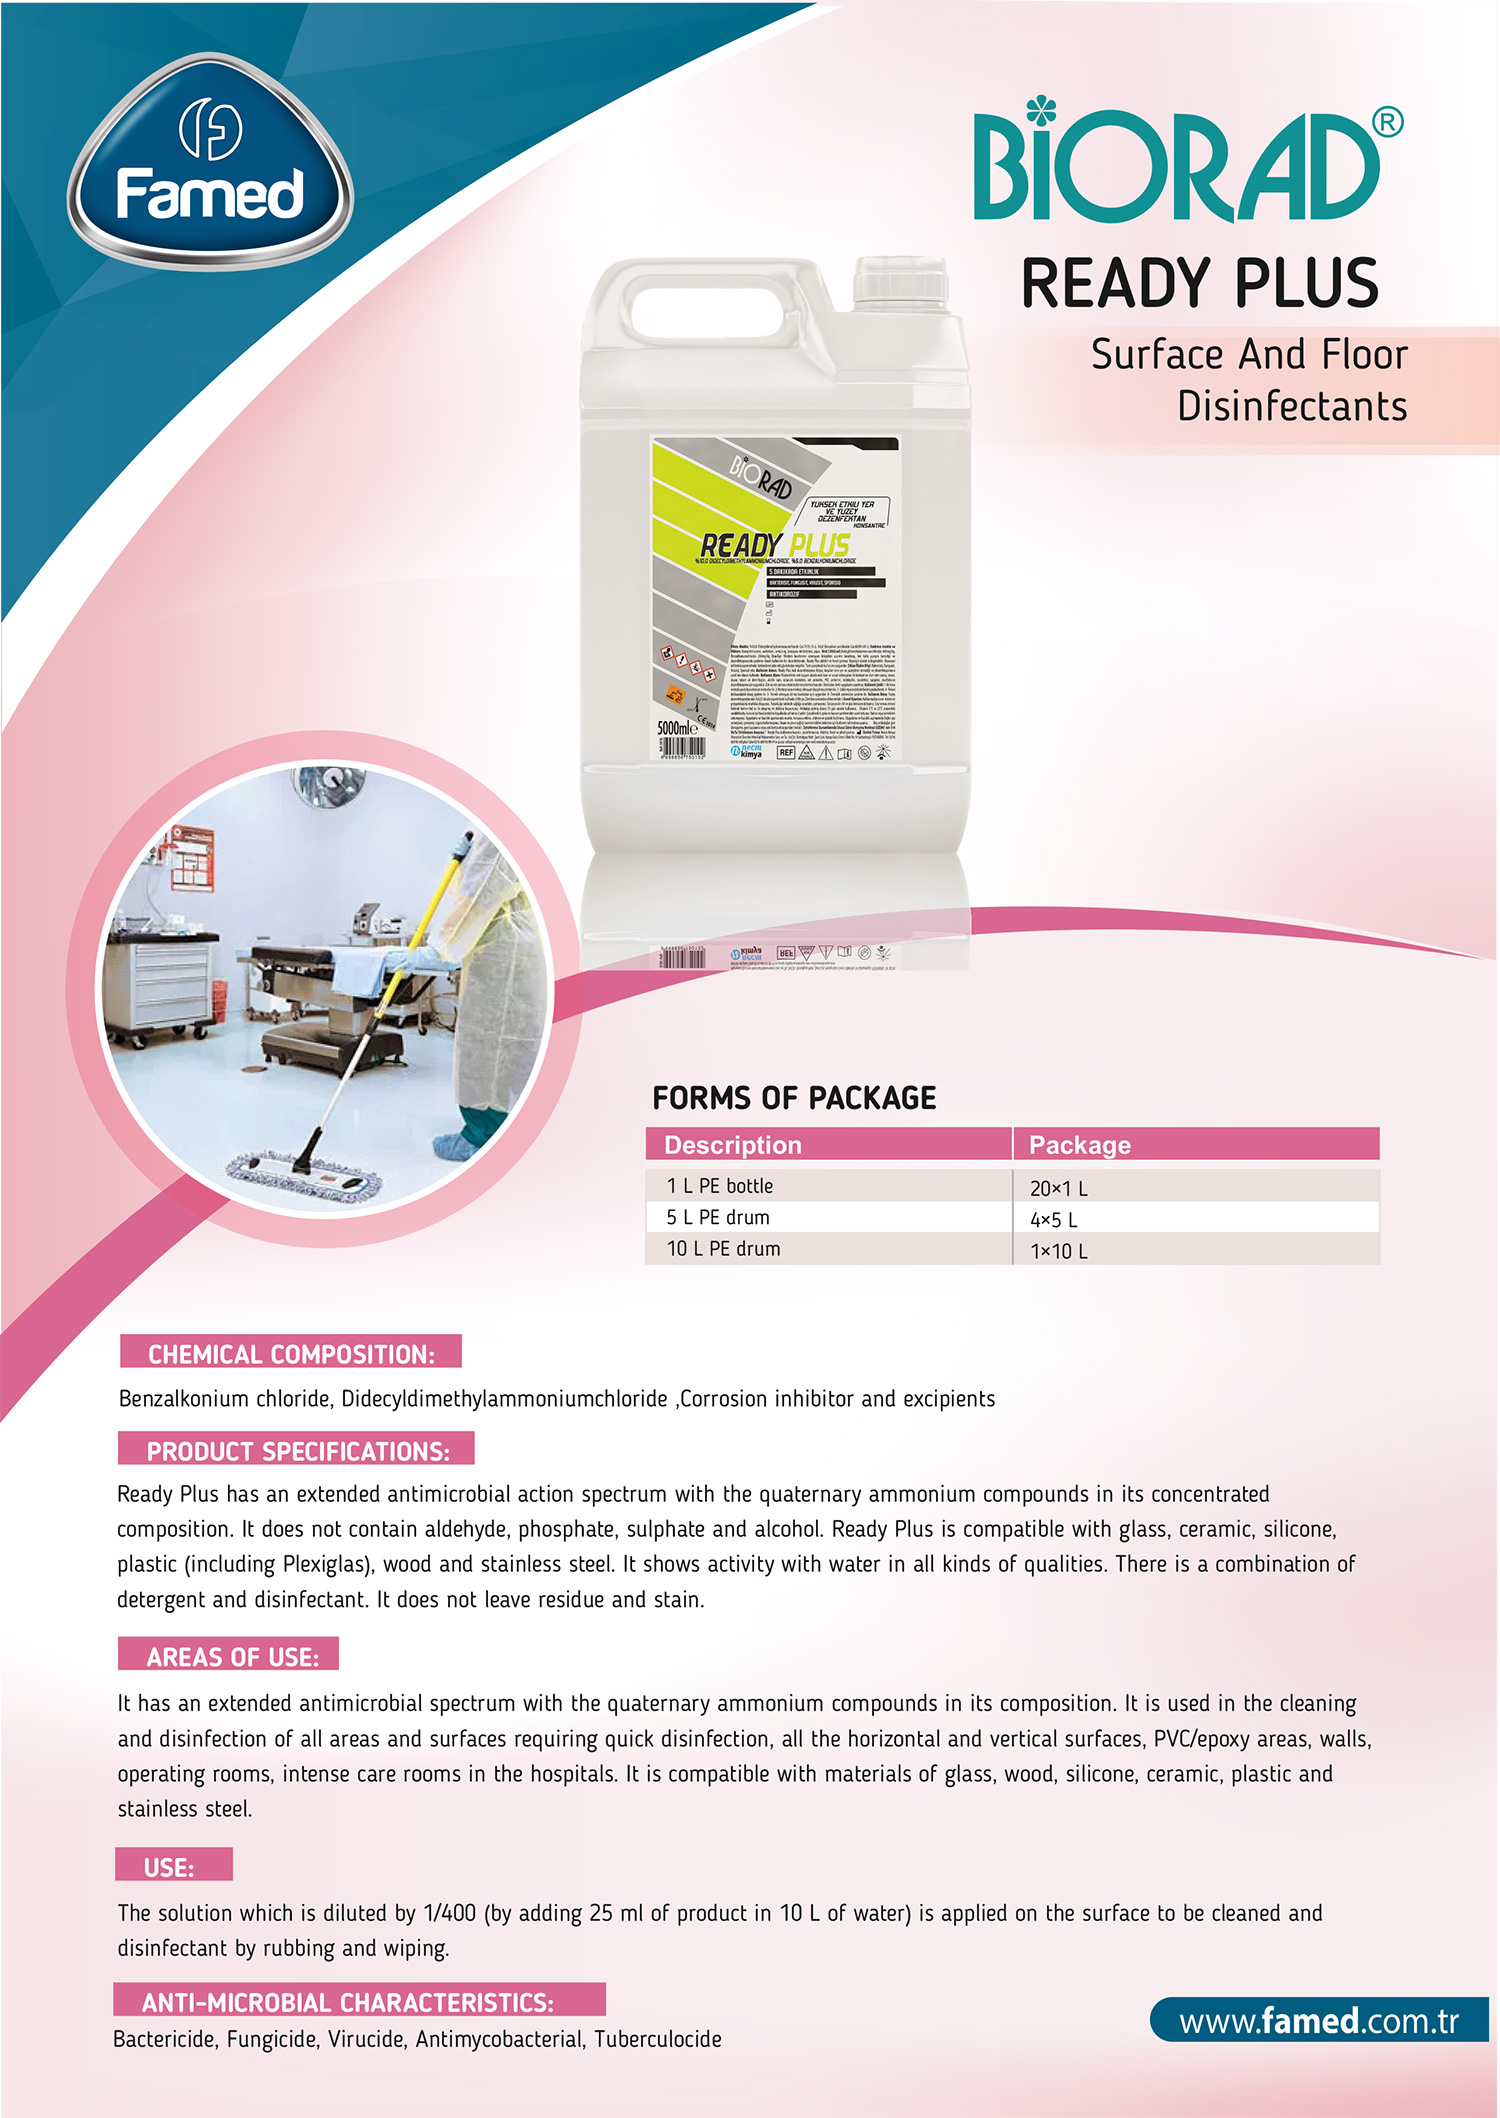 Ready Plus Surface And Floor Disinfectants